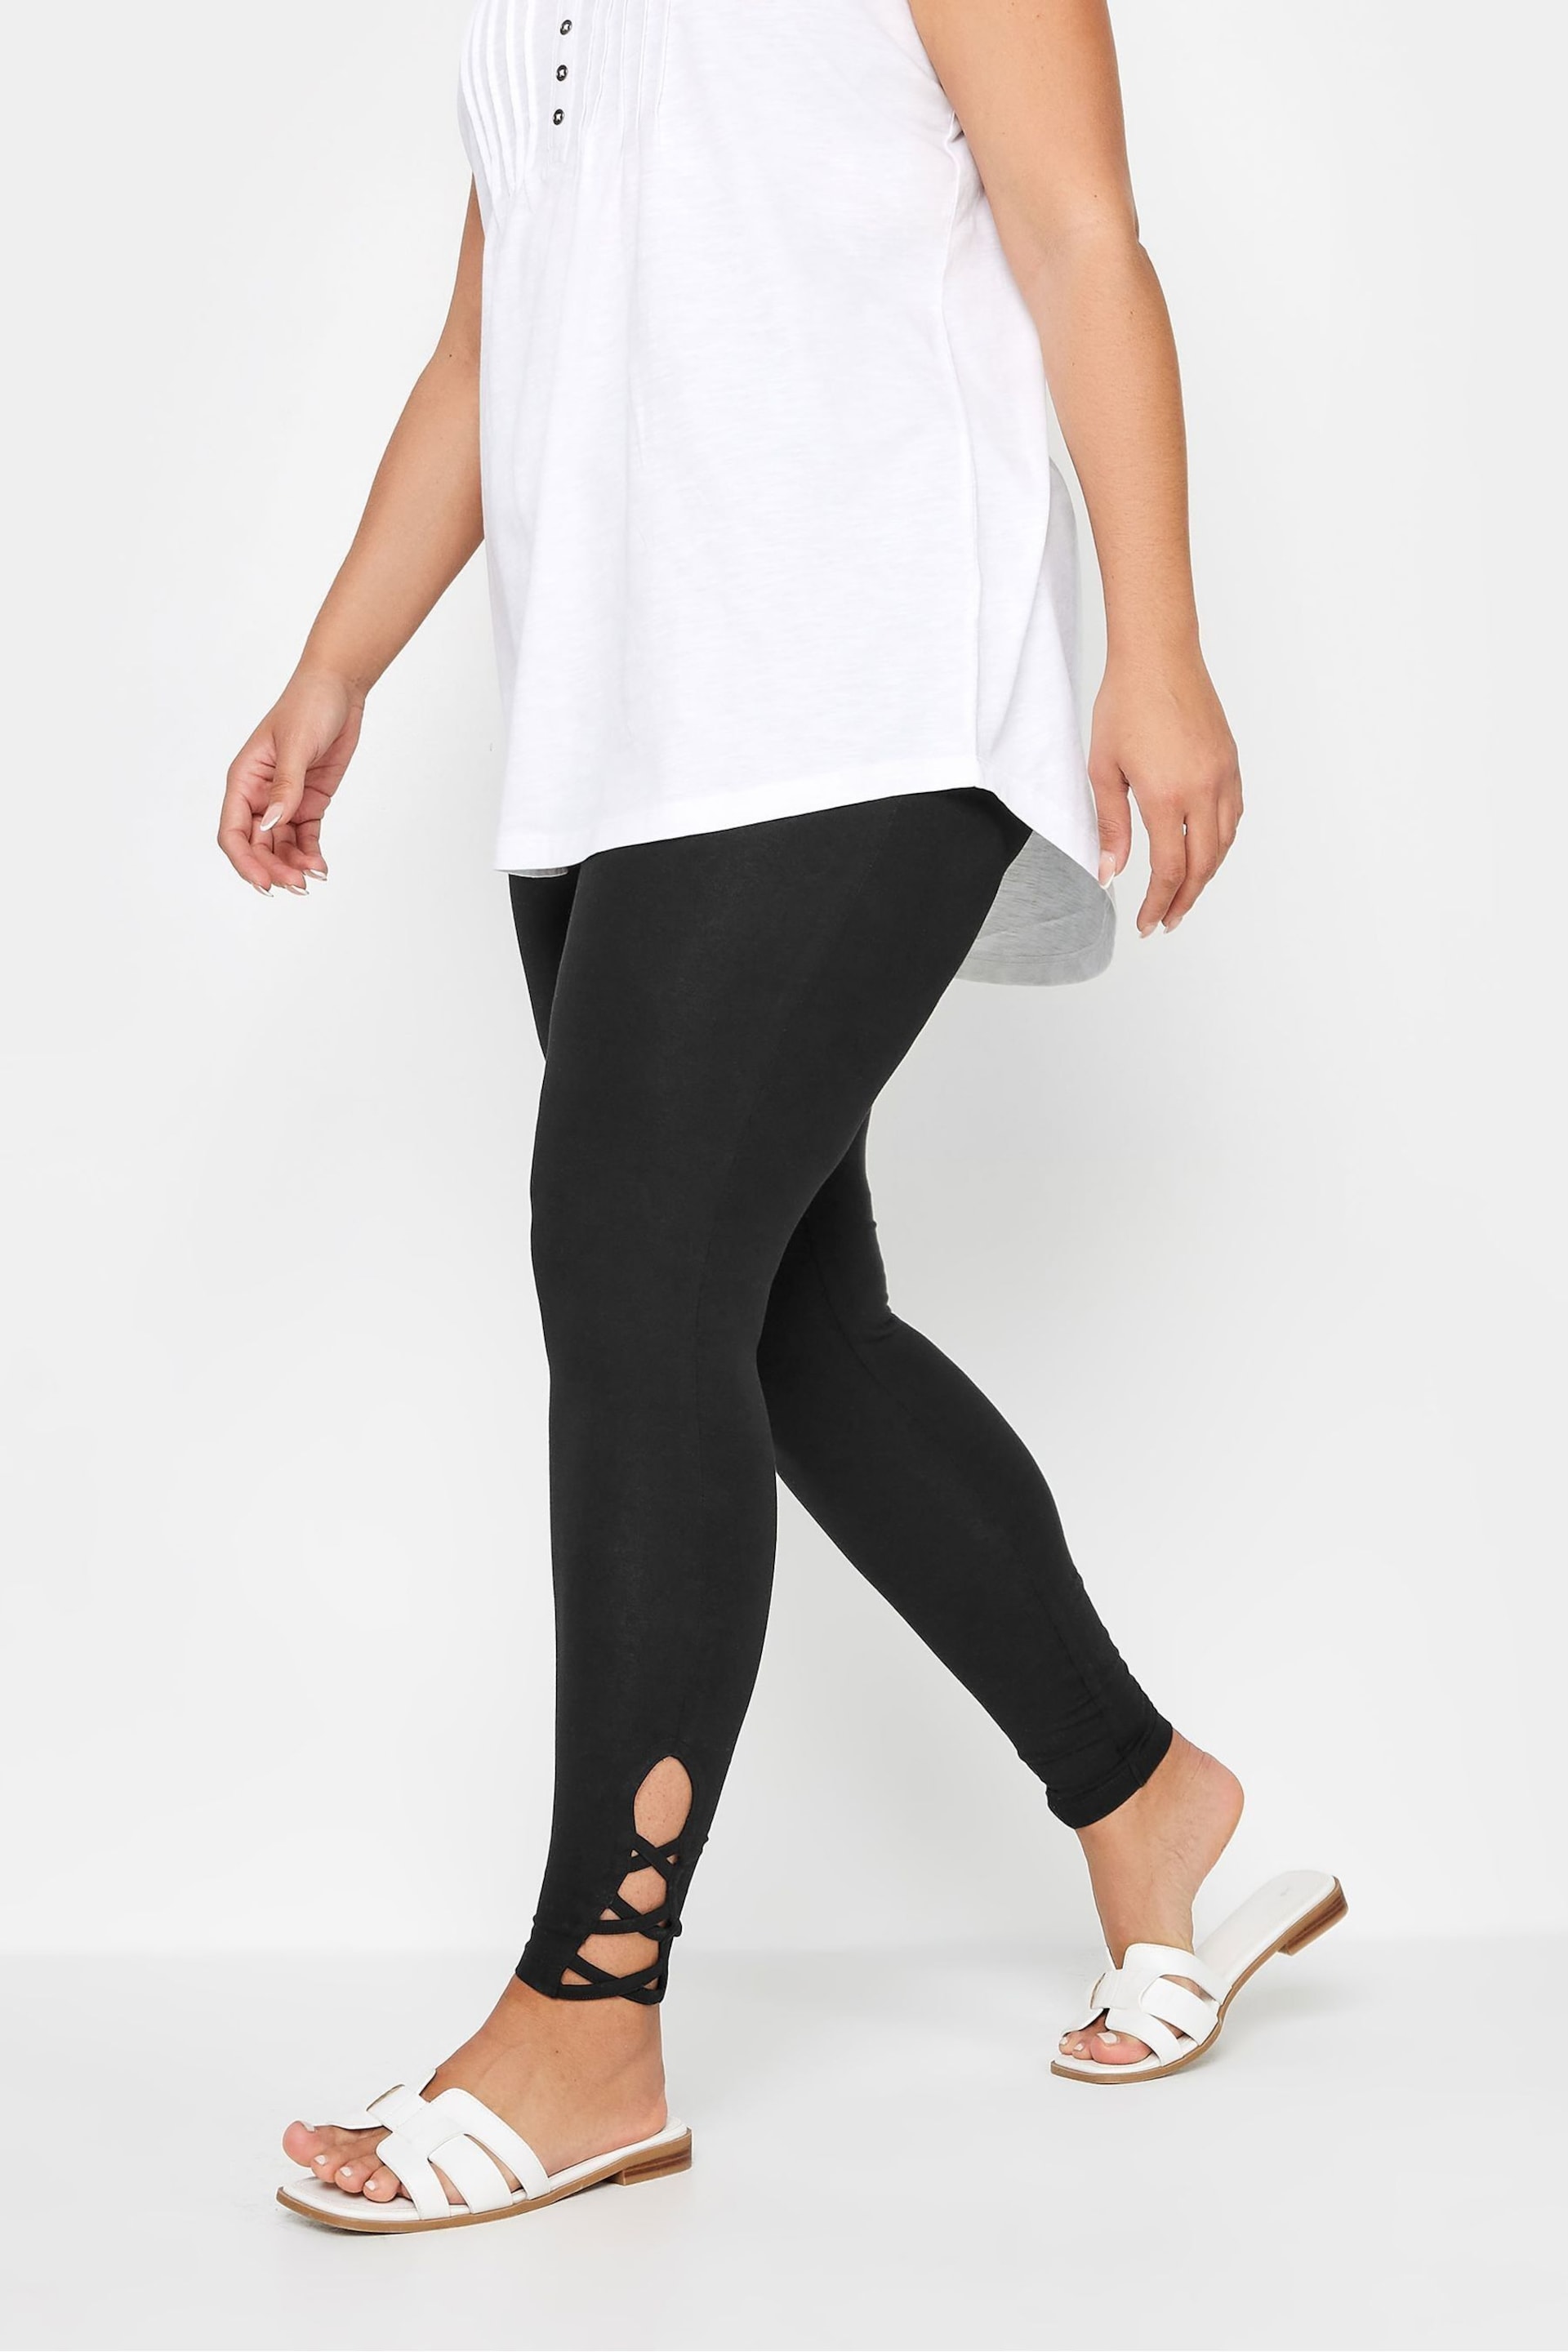 Yours Curve Black Cut Out Leggings - Image 1 of 5